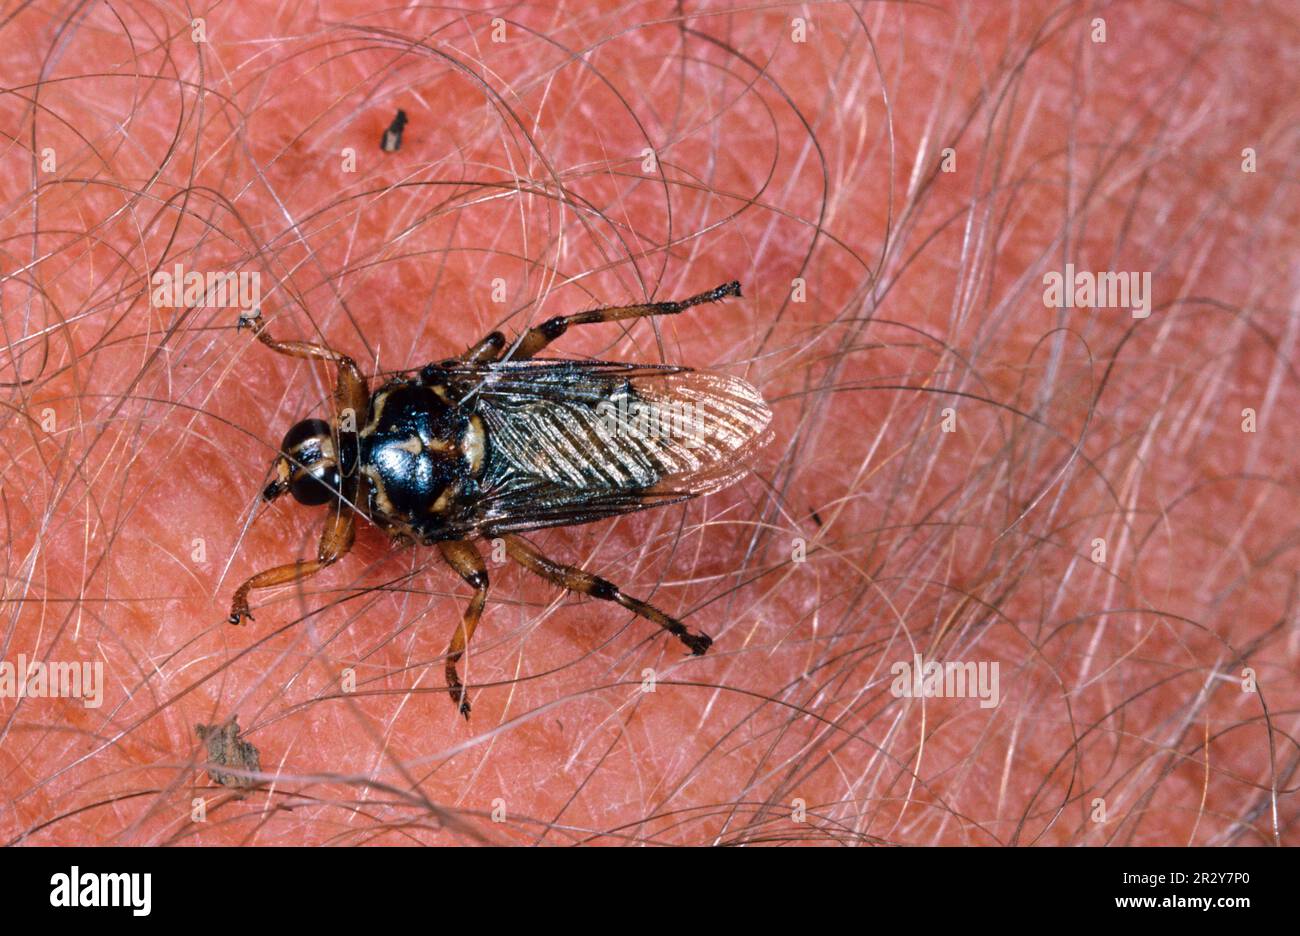 Forest fly (Hippobosca equina), horse fly, louse fly, louse flies, parasite, parasites, other animals, insects, animals, Forest Fly biting skin Stock Photo